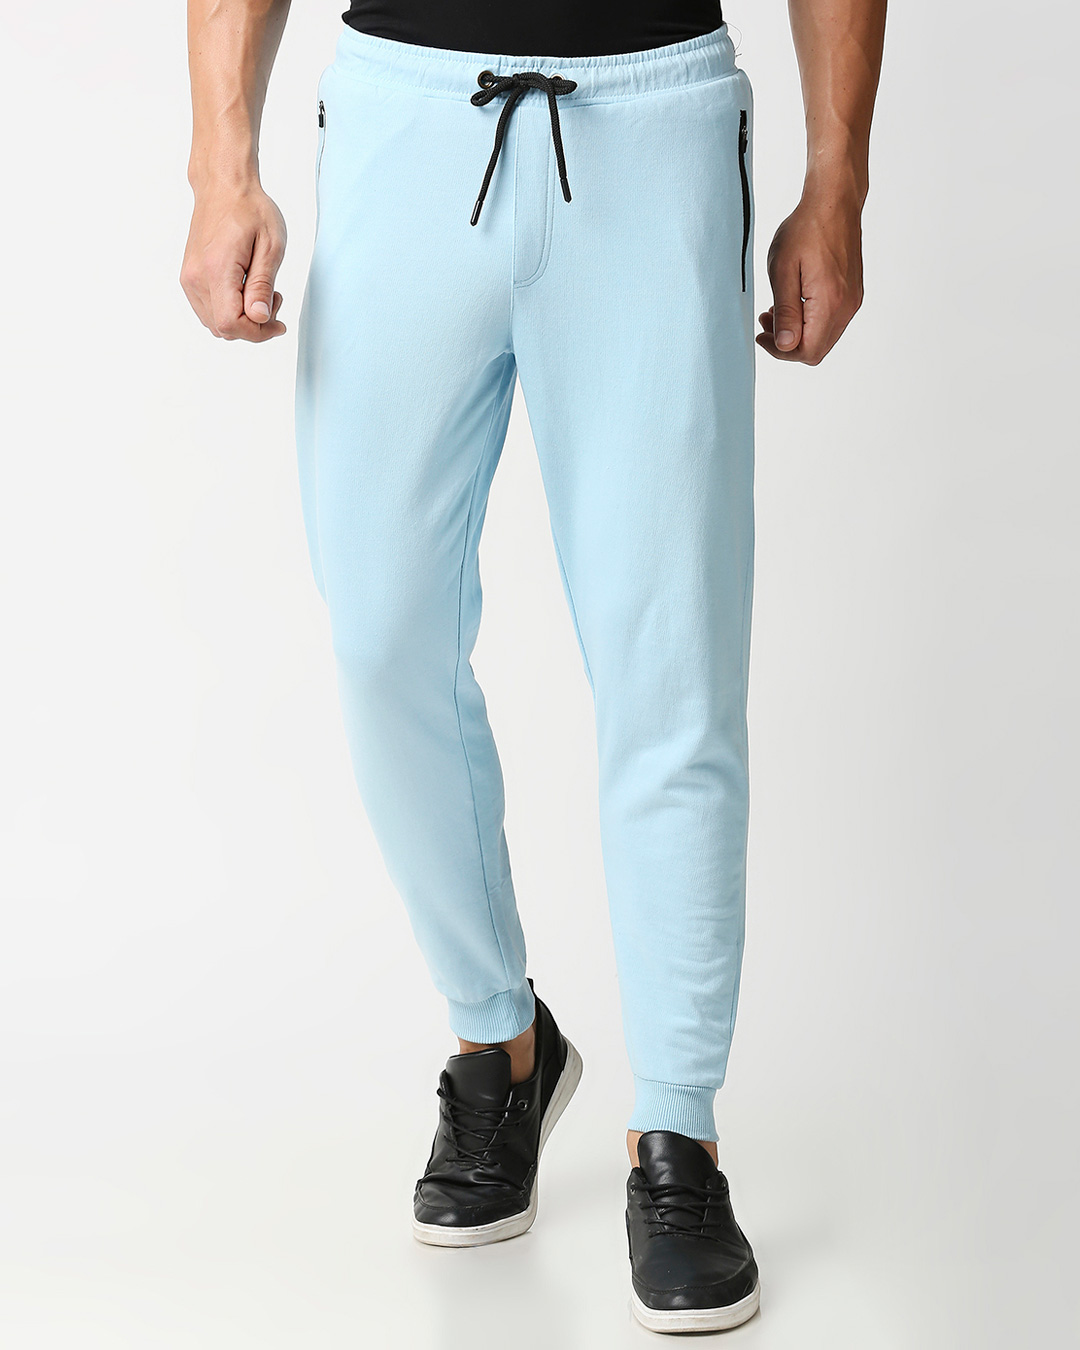 Buy Sky Blue Casual Jogger Pants With Zipper for Men blue Online at ...